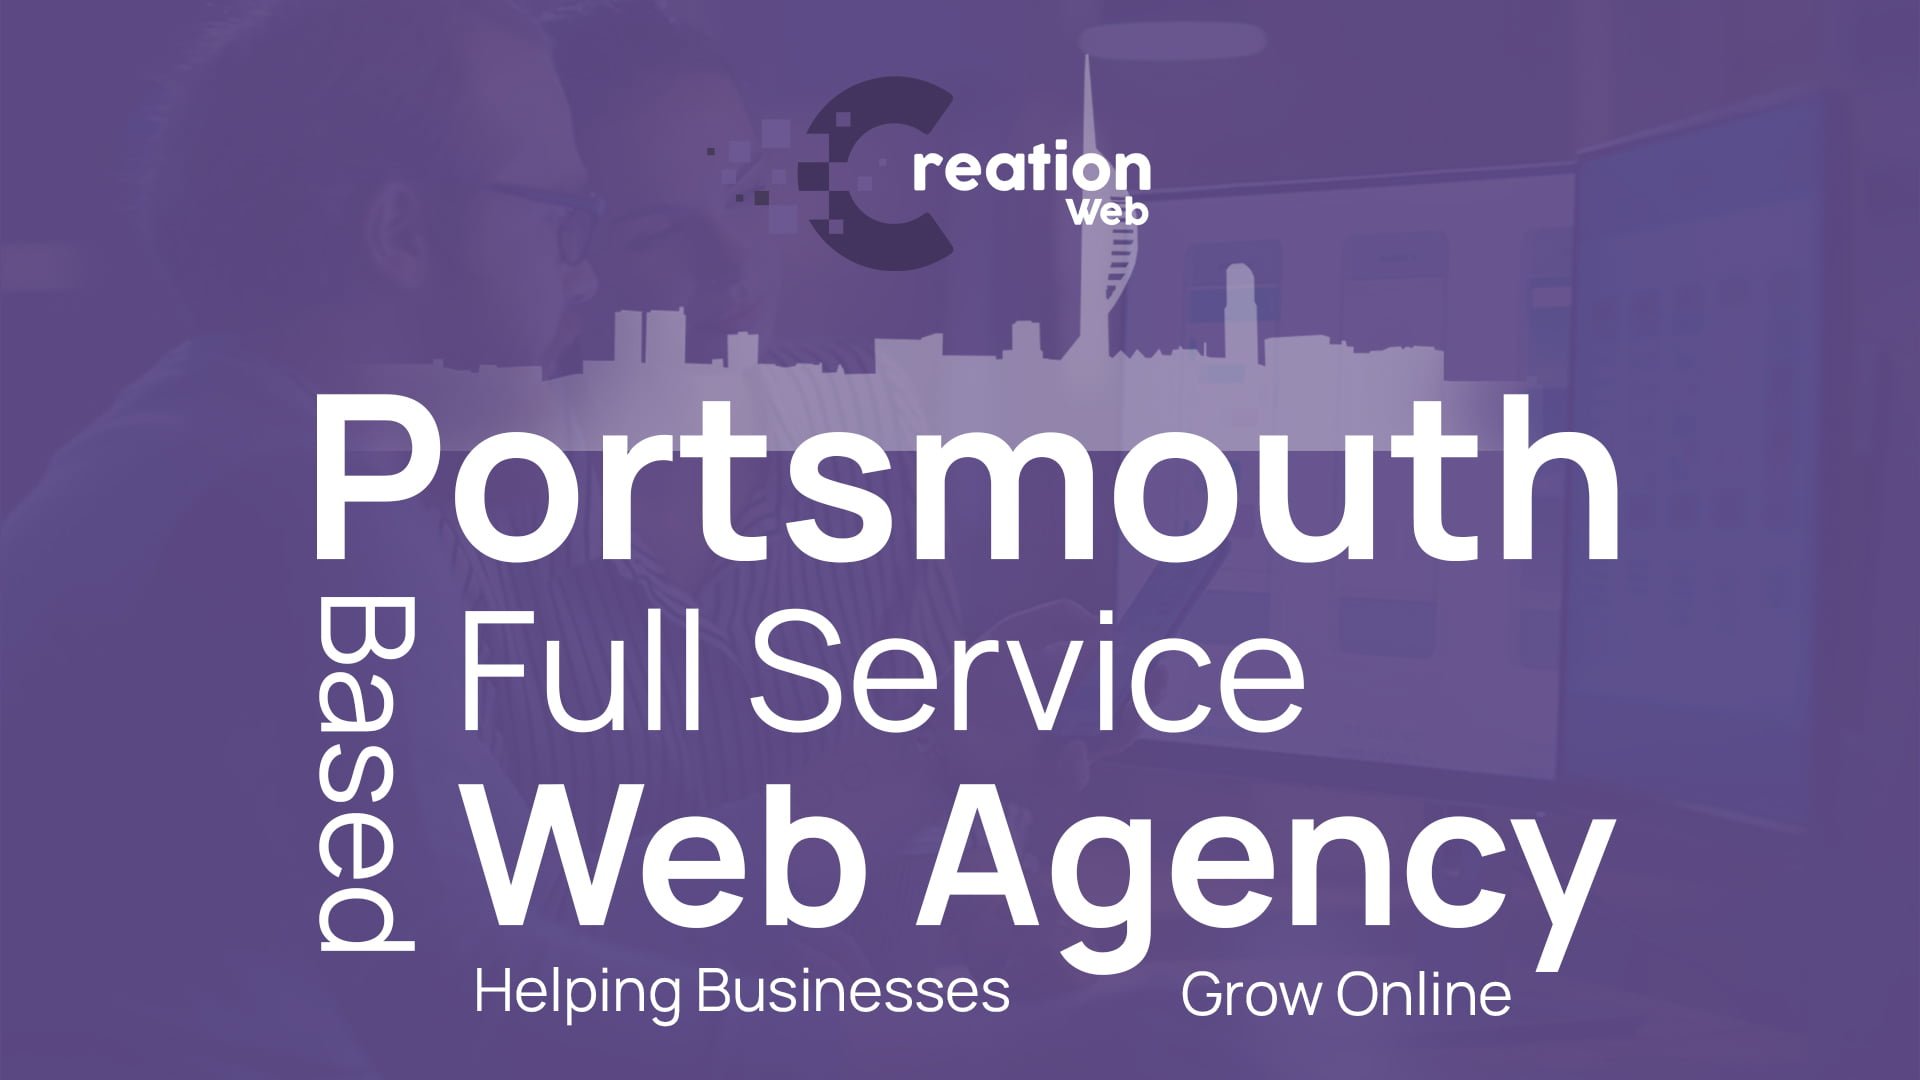 Why Choosing Creation Web for Website Design in Portsmouth Helps Businesses Grow Online